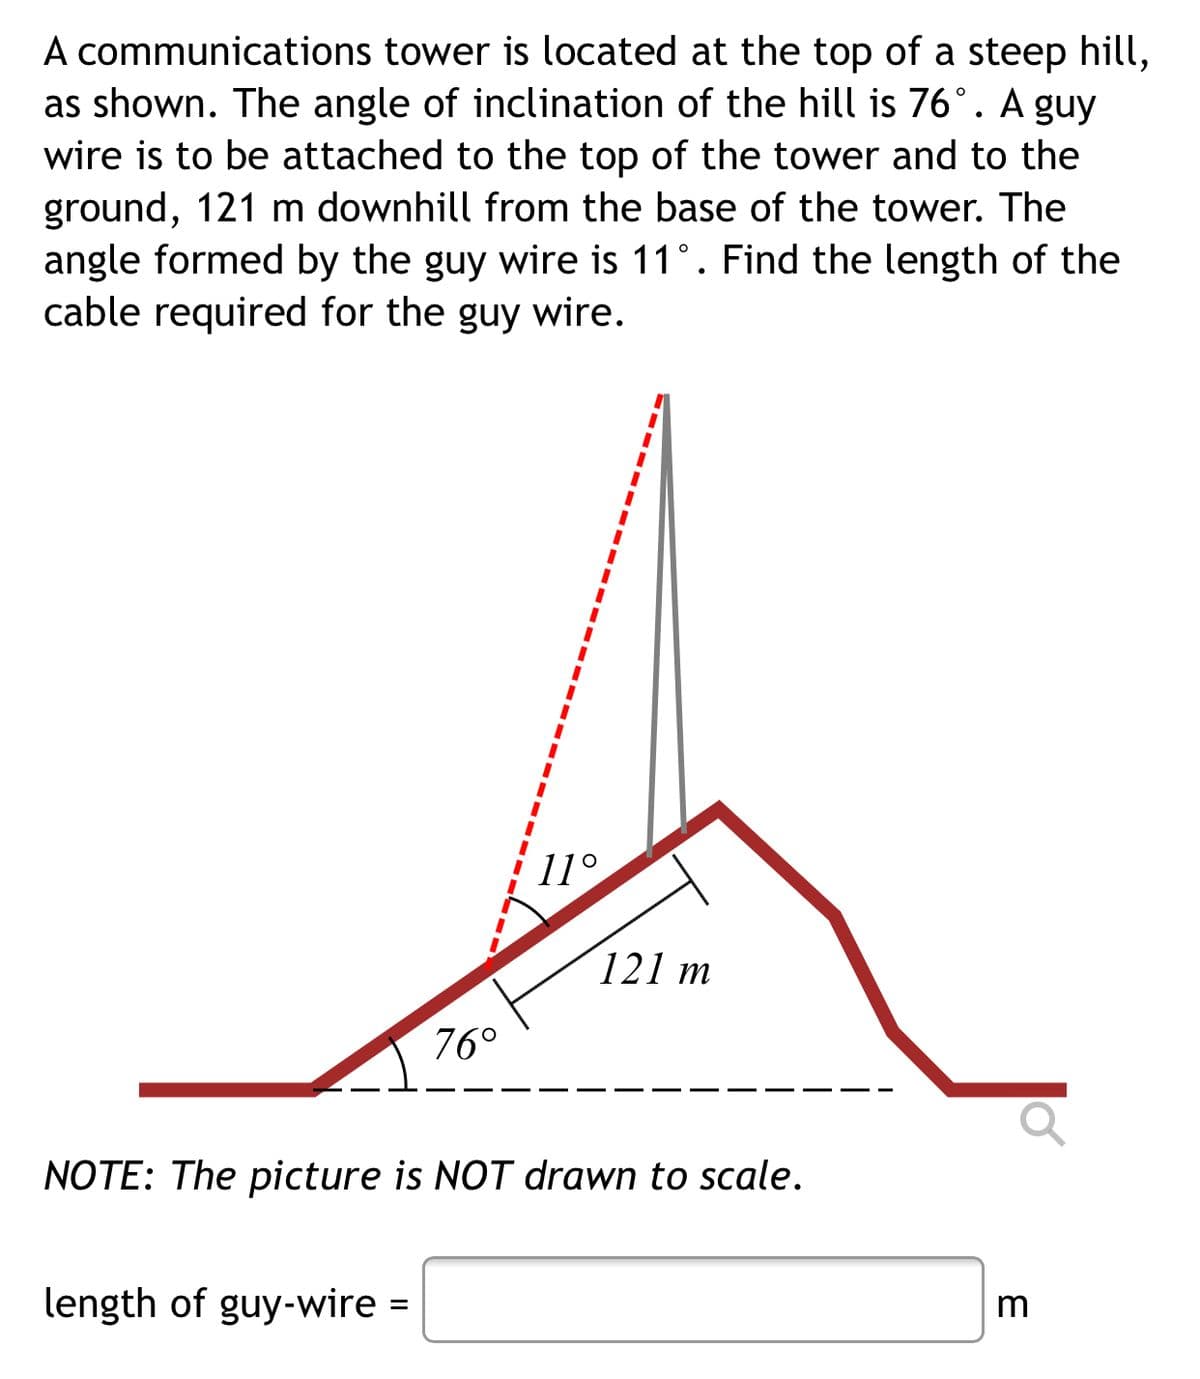 A communications tower is located at the top of a steep hill,
as shown. The angle of inclination of the hill is 76°. A guy
wire is to be attached to the top of the tower and to the
ground, 121 m downhill from the base of the tower. The
angle formed by the guy wire is 11°. Find the length of the
cable required for the guy wire.
11°
121 m
76°
NOTE: The picture is NOT drawn to scale.
length of guy-wire
